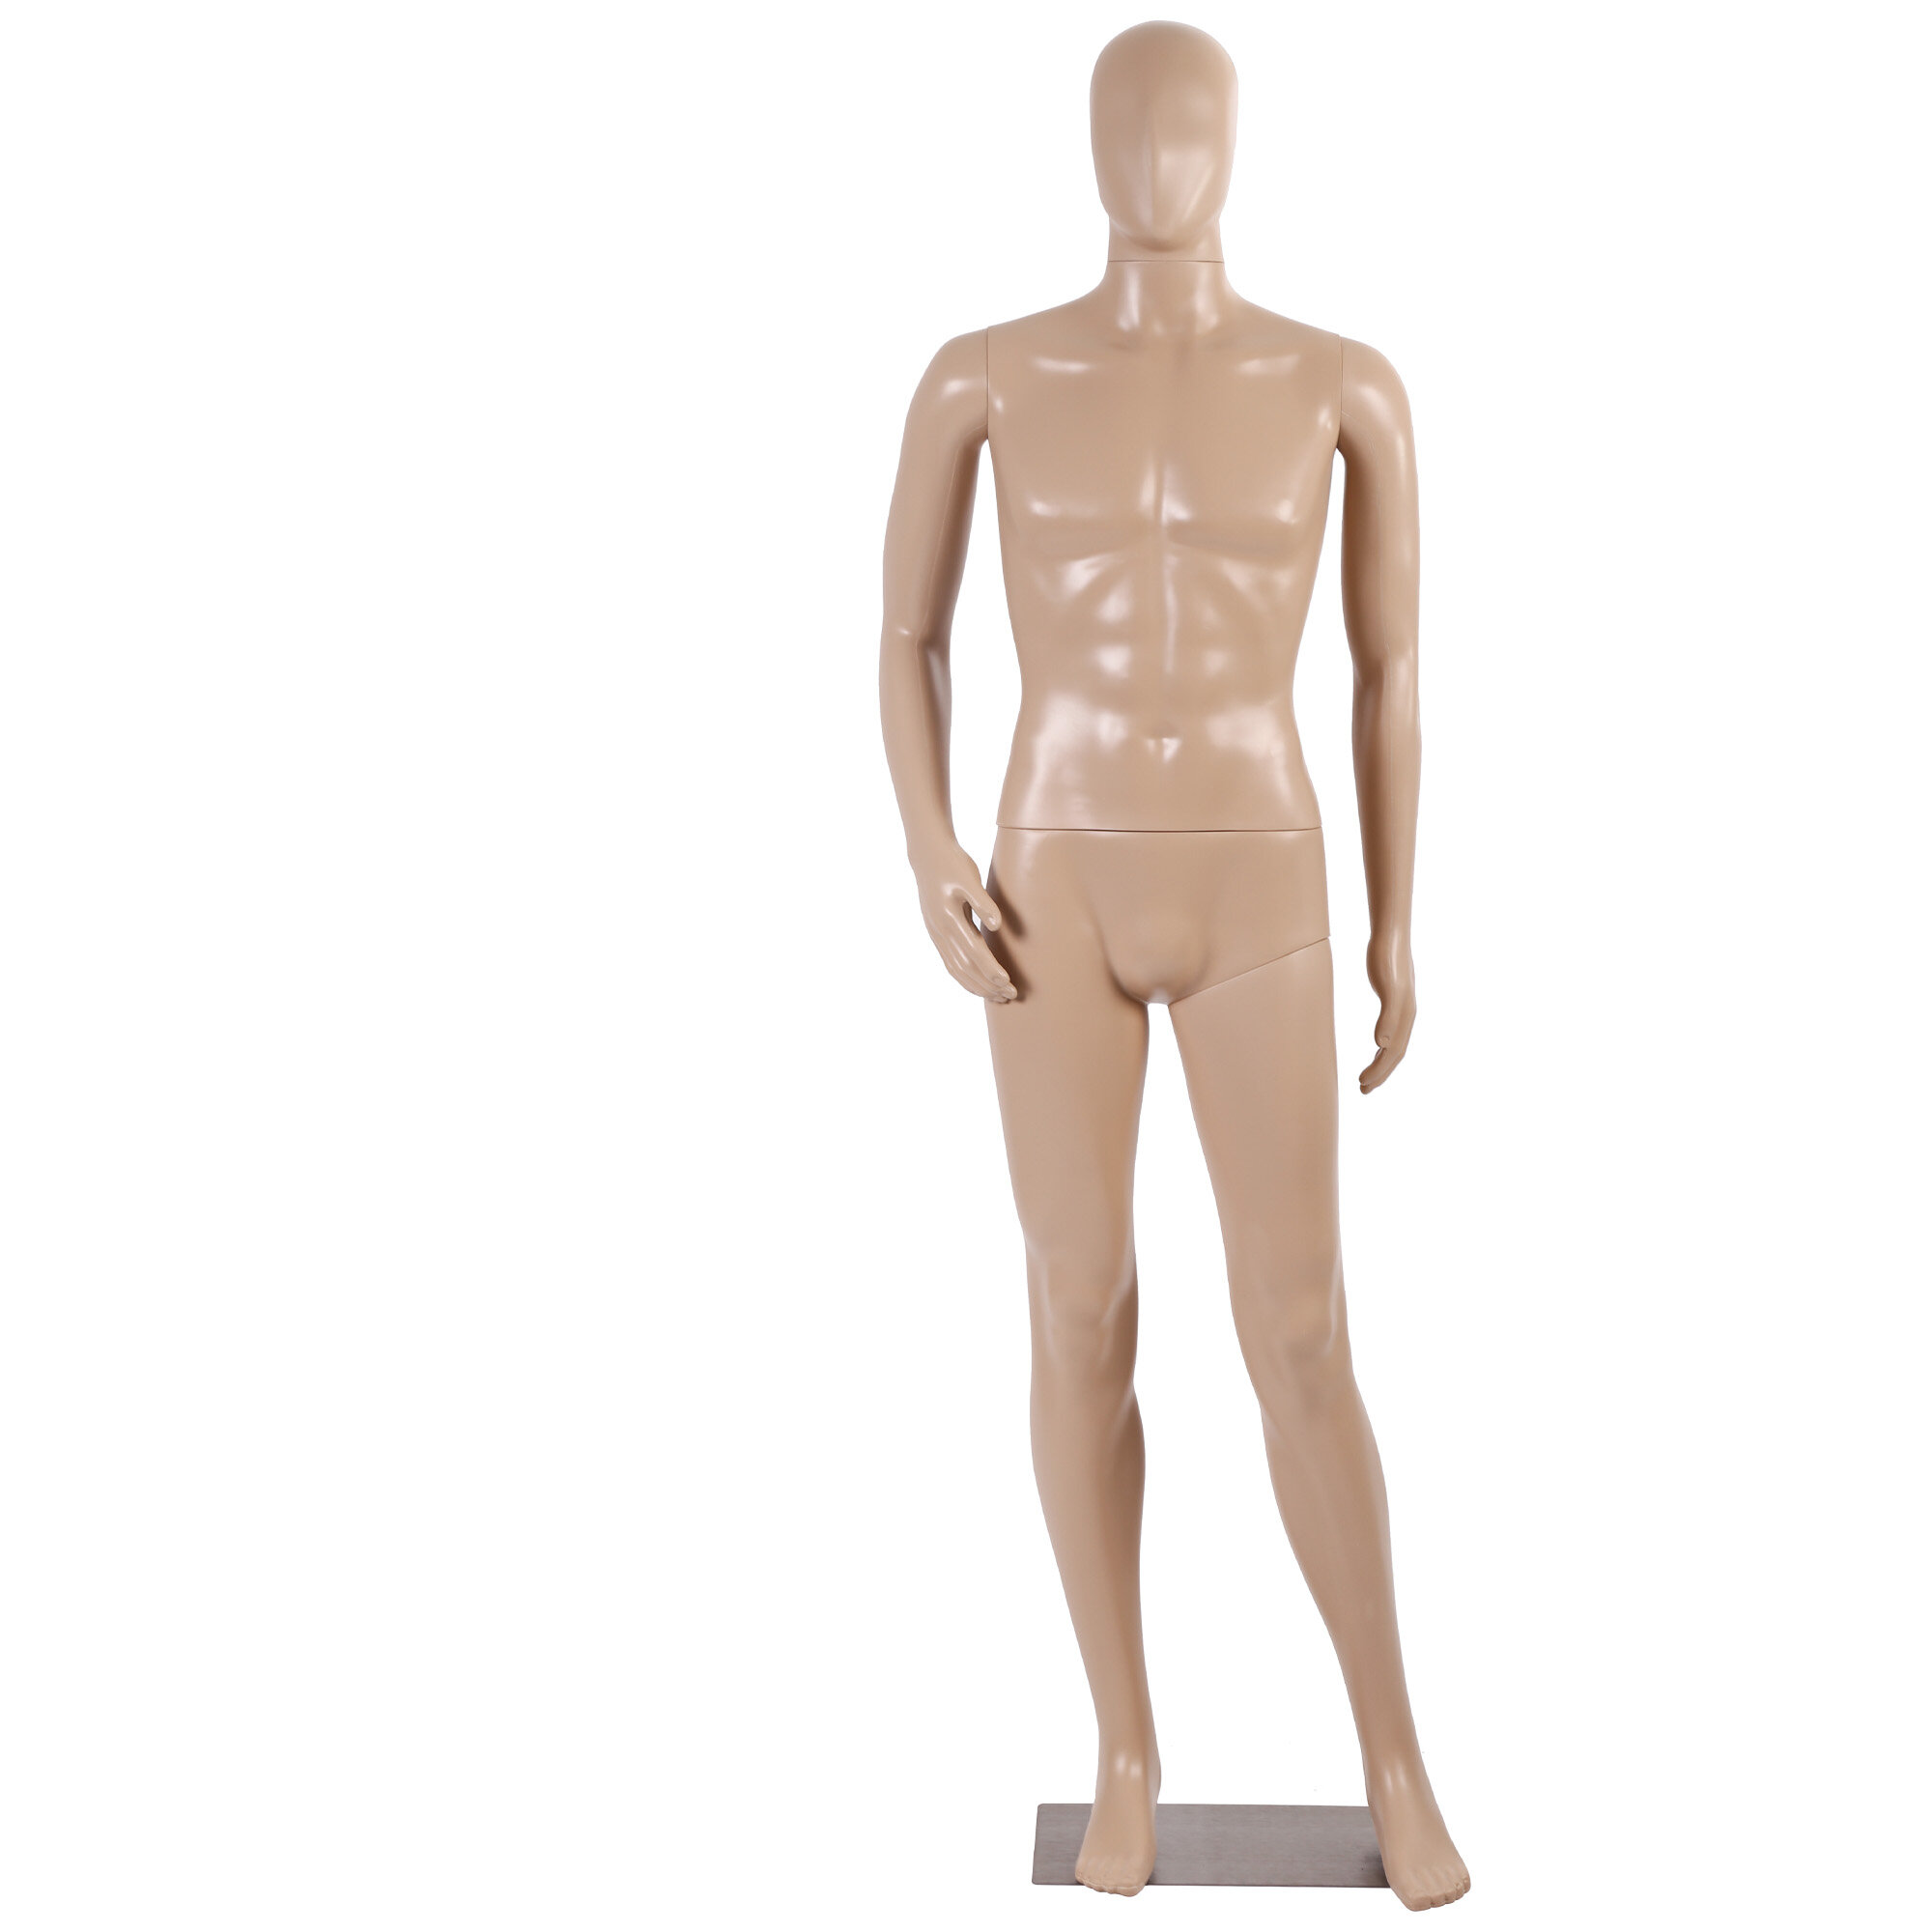 Male Full Body Realistic Mannequin Display Head Turns Dress Form wBase 185  